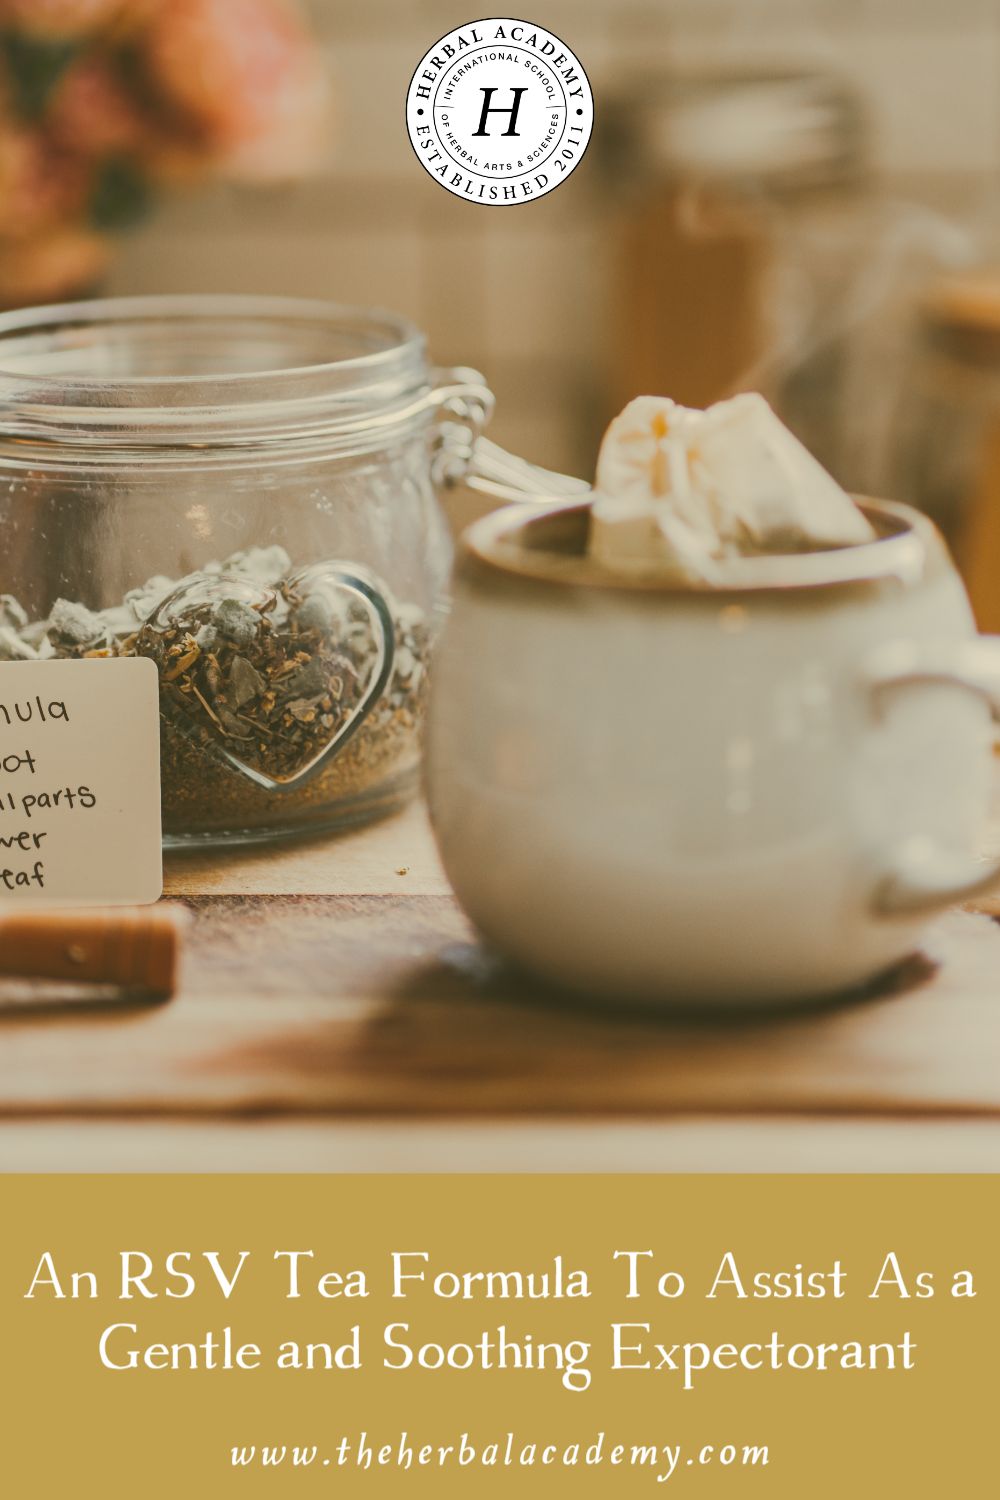 An RSV Tea Formula to Assist as a Gentle and Soothing Expectorant | Herbal Academy | This soothing RSV Tea is a nice blend to have on hand for all of those respiratory viruses that we encounter during the winter months.